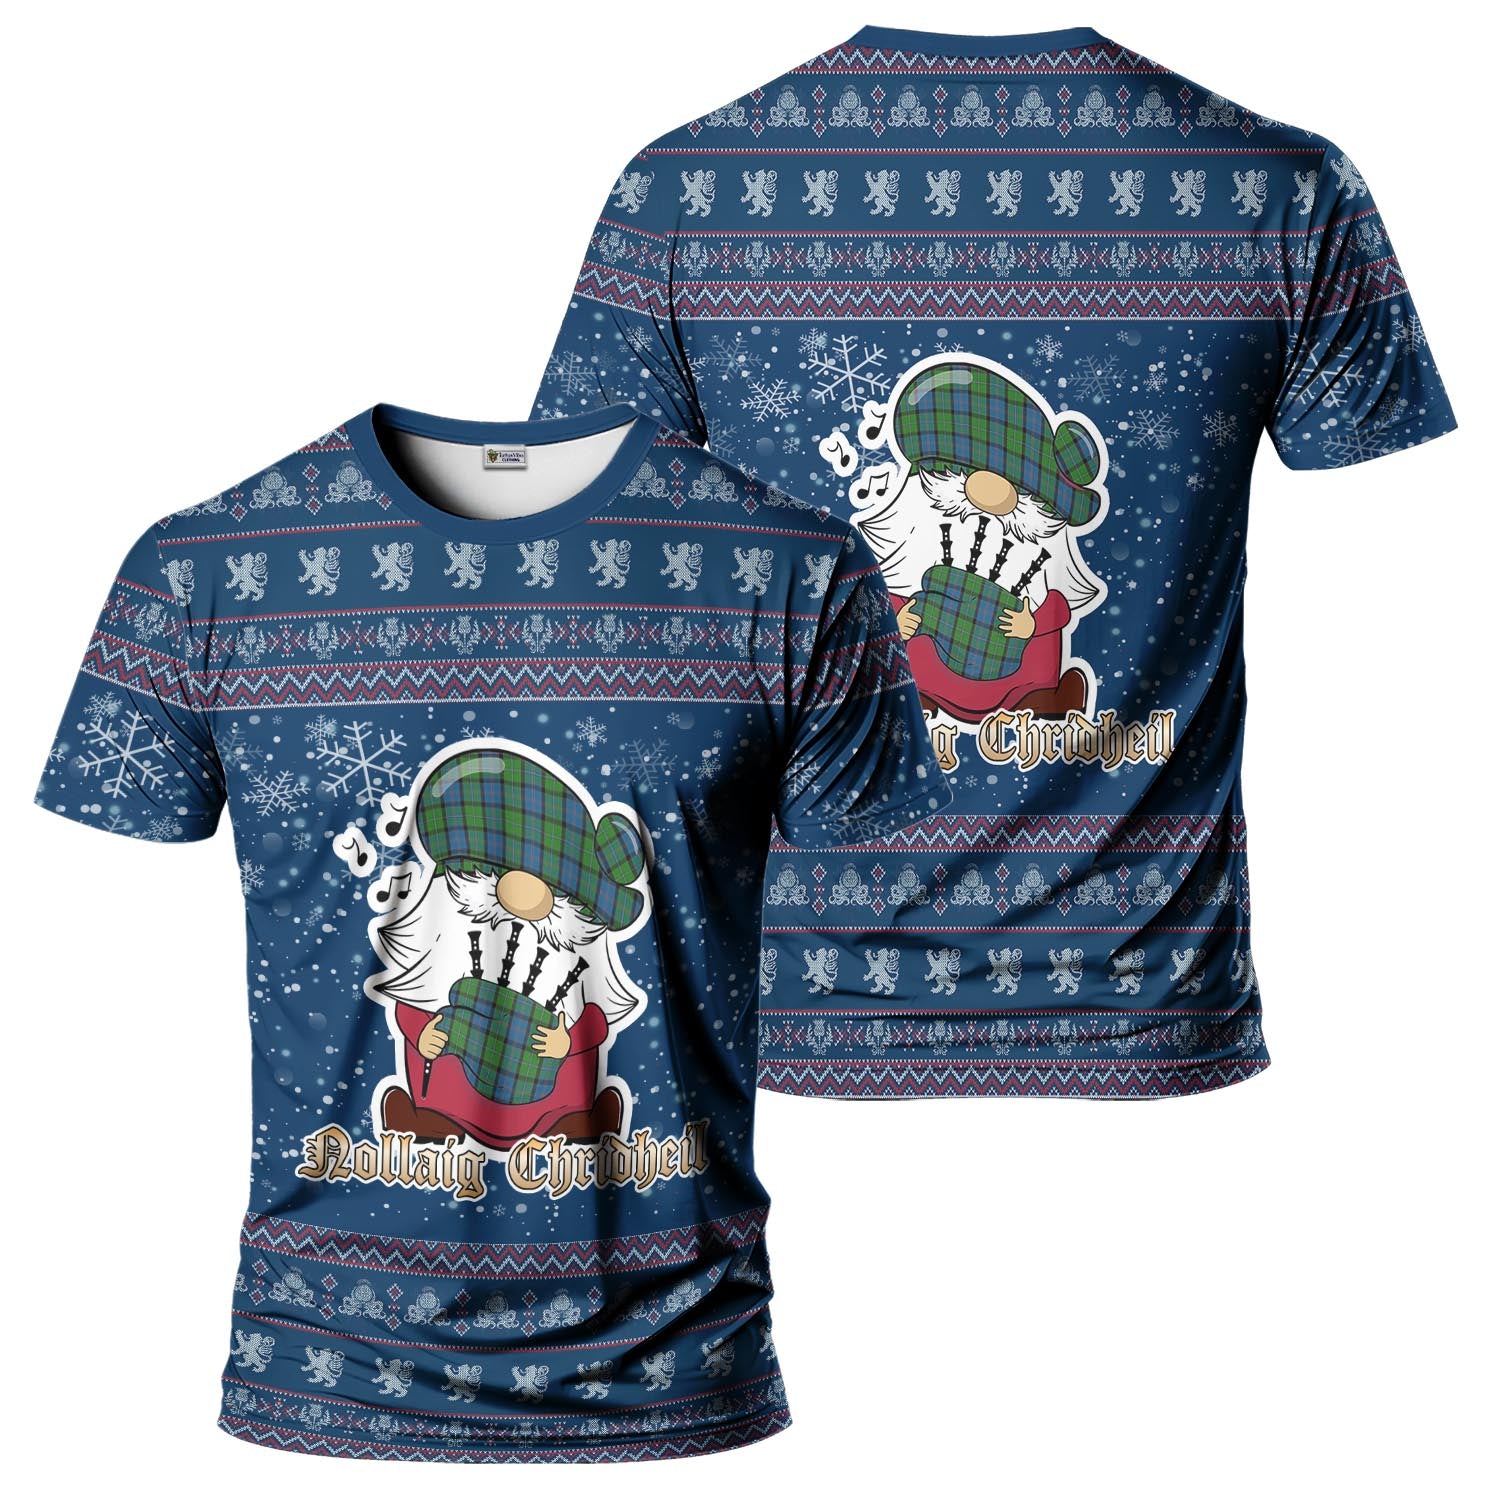 Stirling Clan Christmas Family T-Shirt with Funny Gnome Playing Bagpipes Kid's Shirt Blue - Tartanvibesclothing